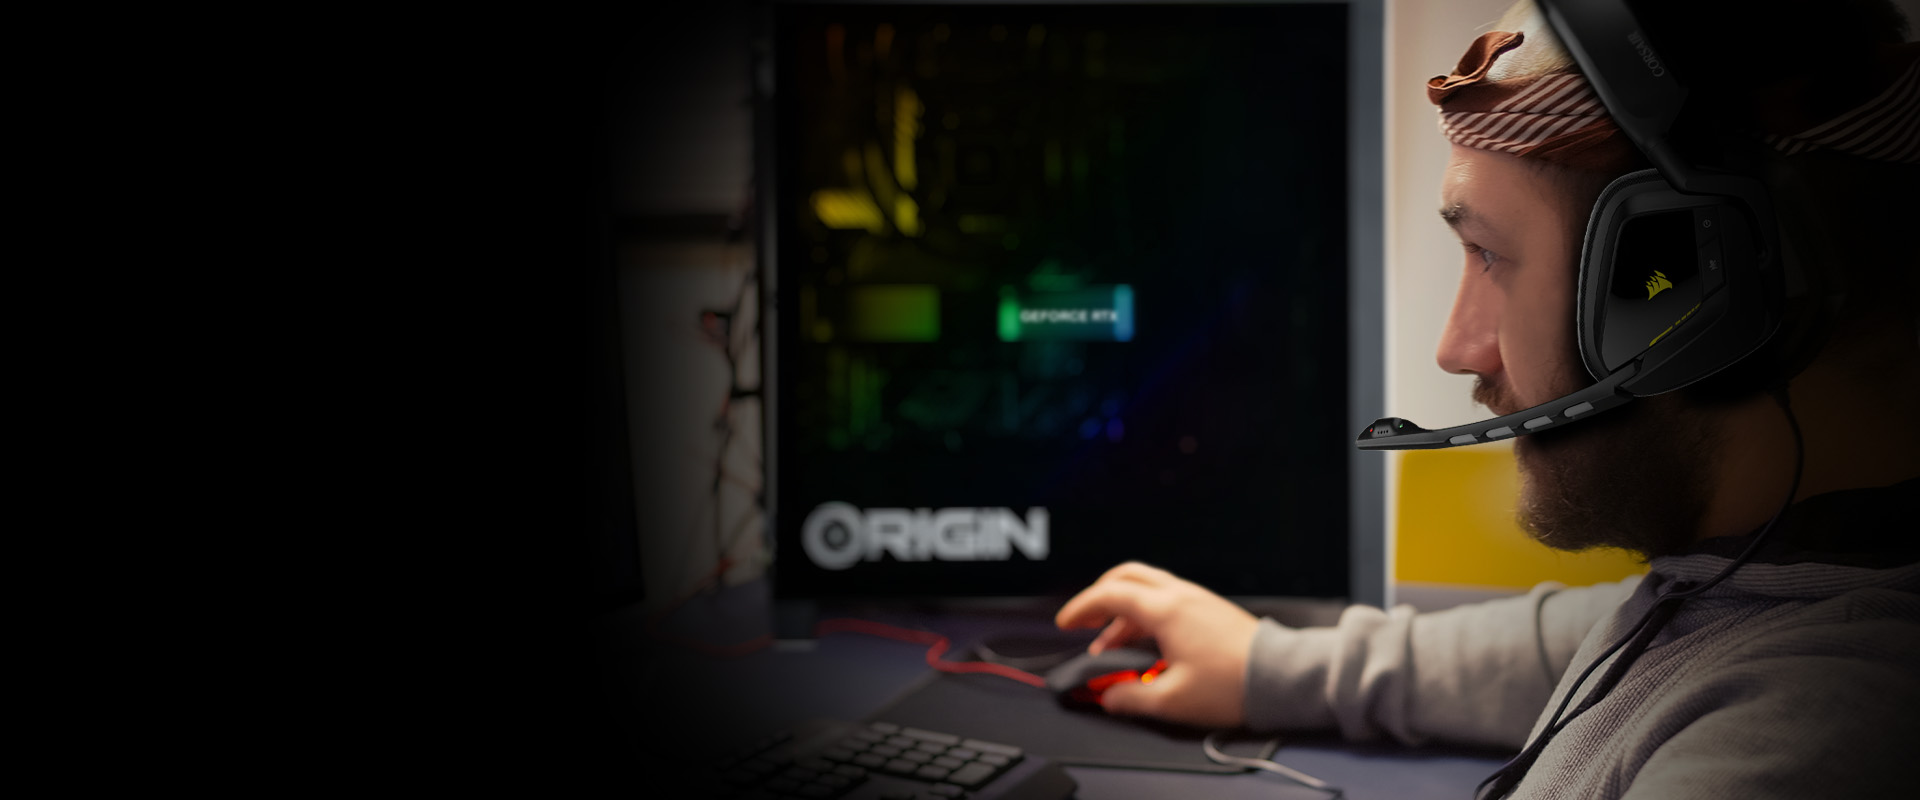 ORIGIN PC systems are built and supported in the USA